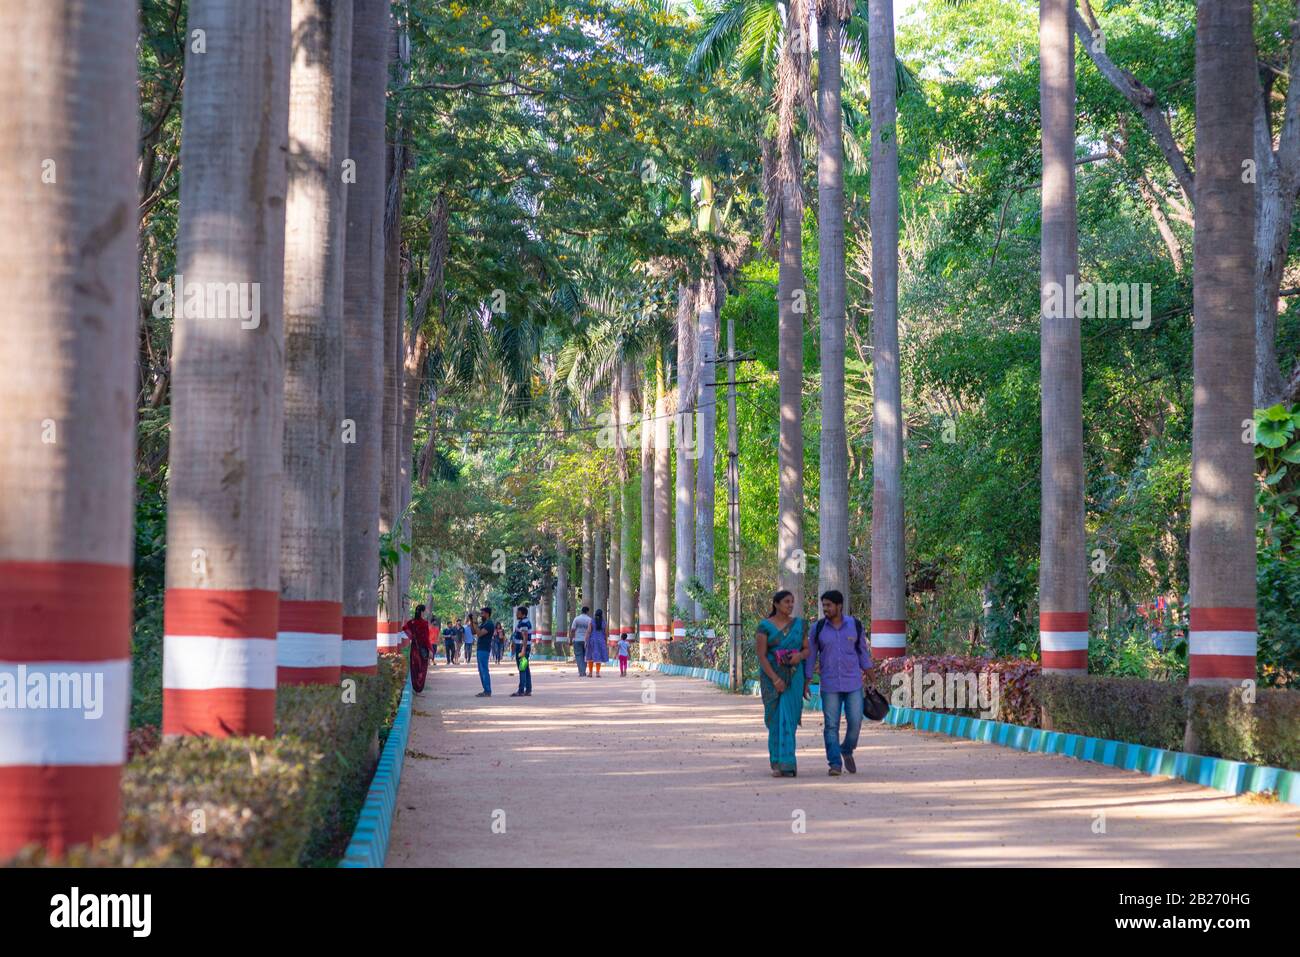 Mysore, India - March 11, 2018: A couple strolling on a palm tree alley in a park near Karanji Lake, with other people in the background. Stock Photo